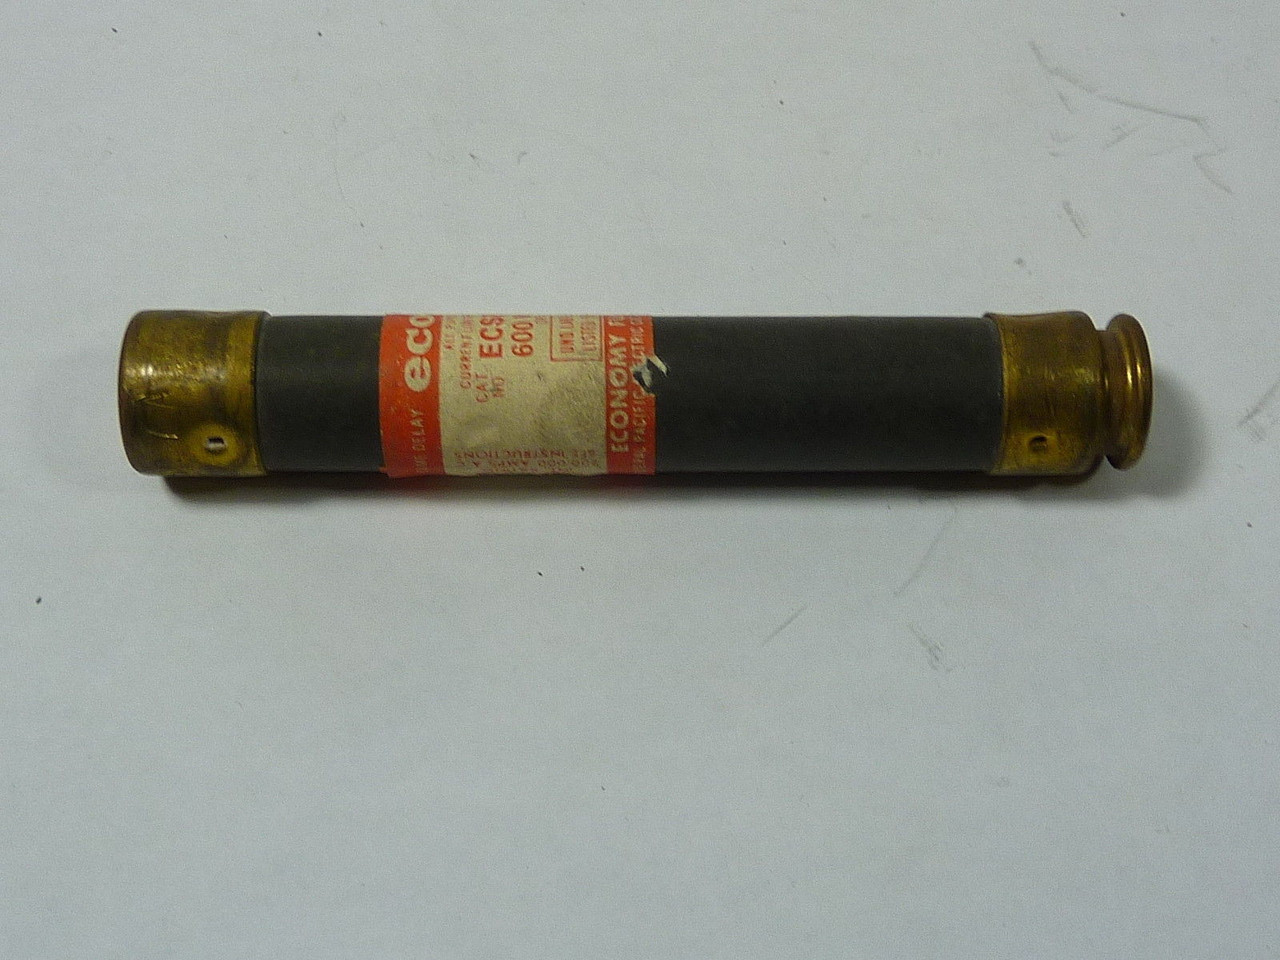 Reliance ECSR-7 Current Limiting Fuse 7A 600V USED